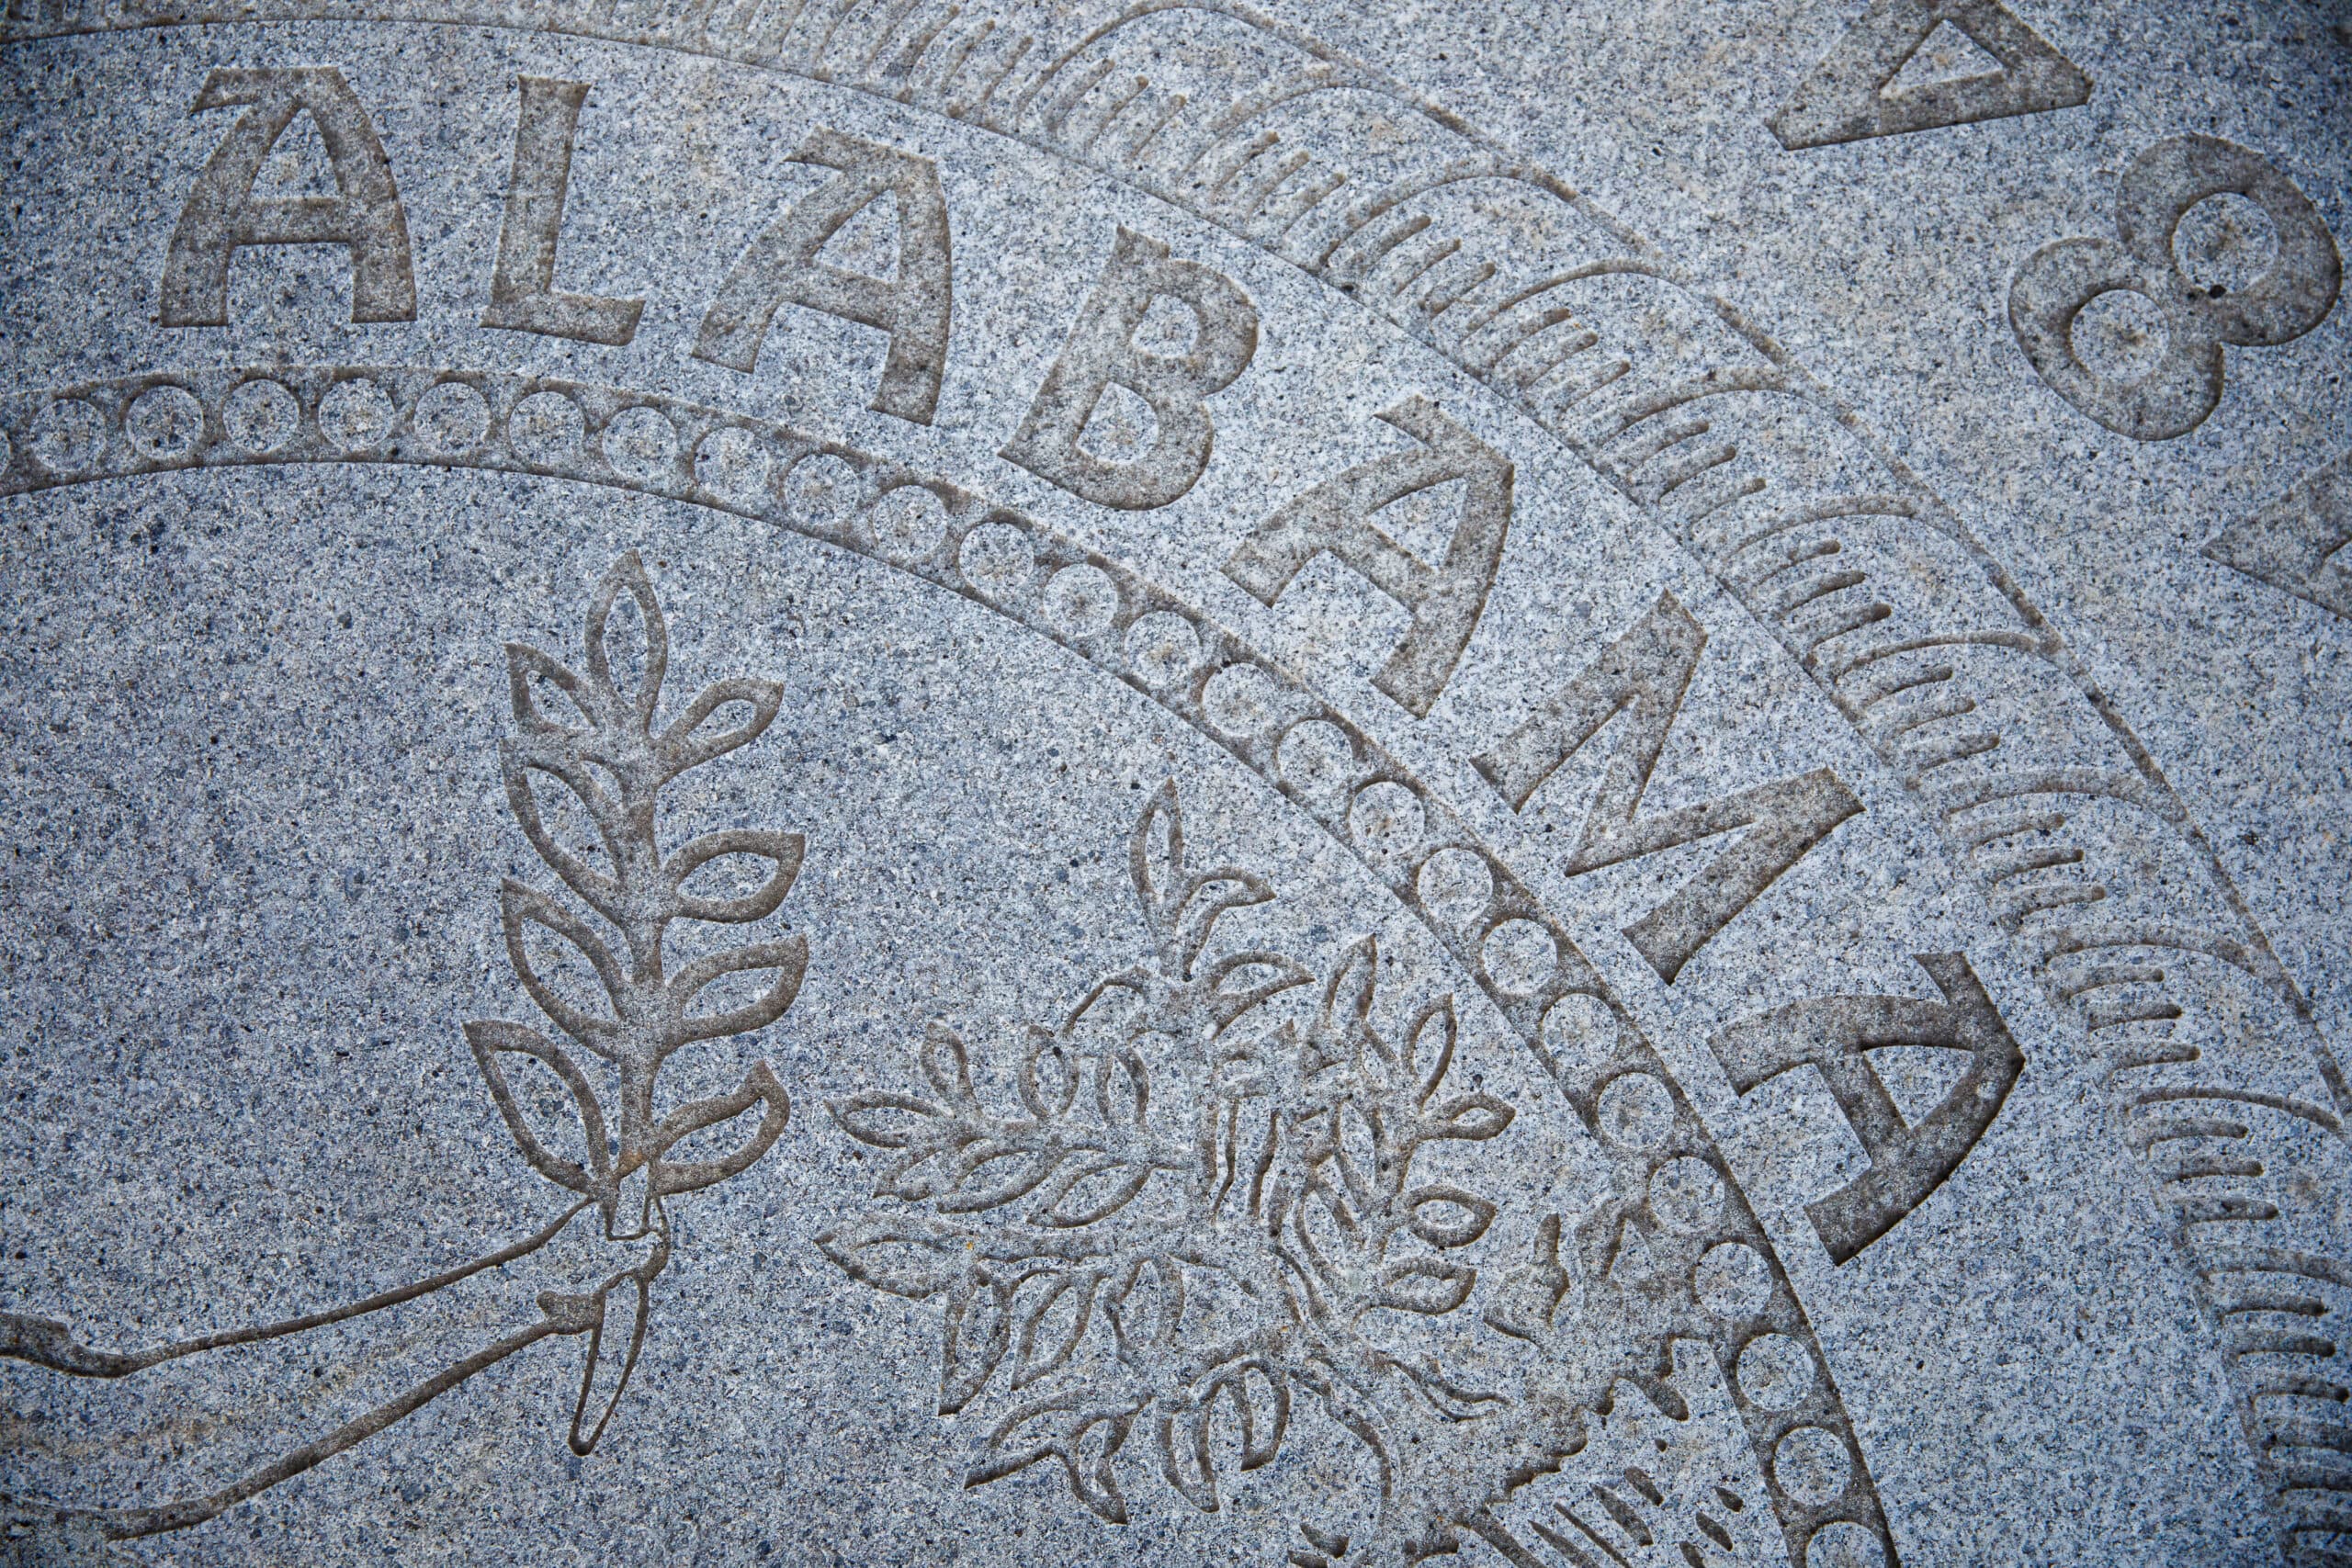 Architectural detail of The University of Alabama seal